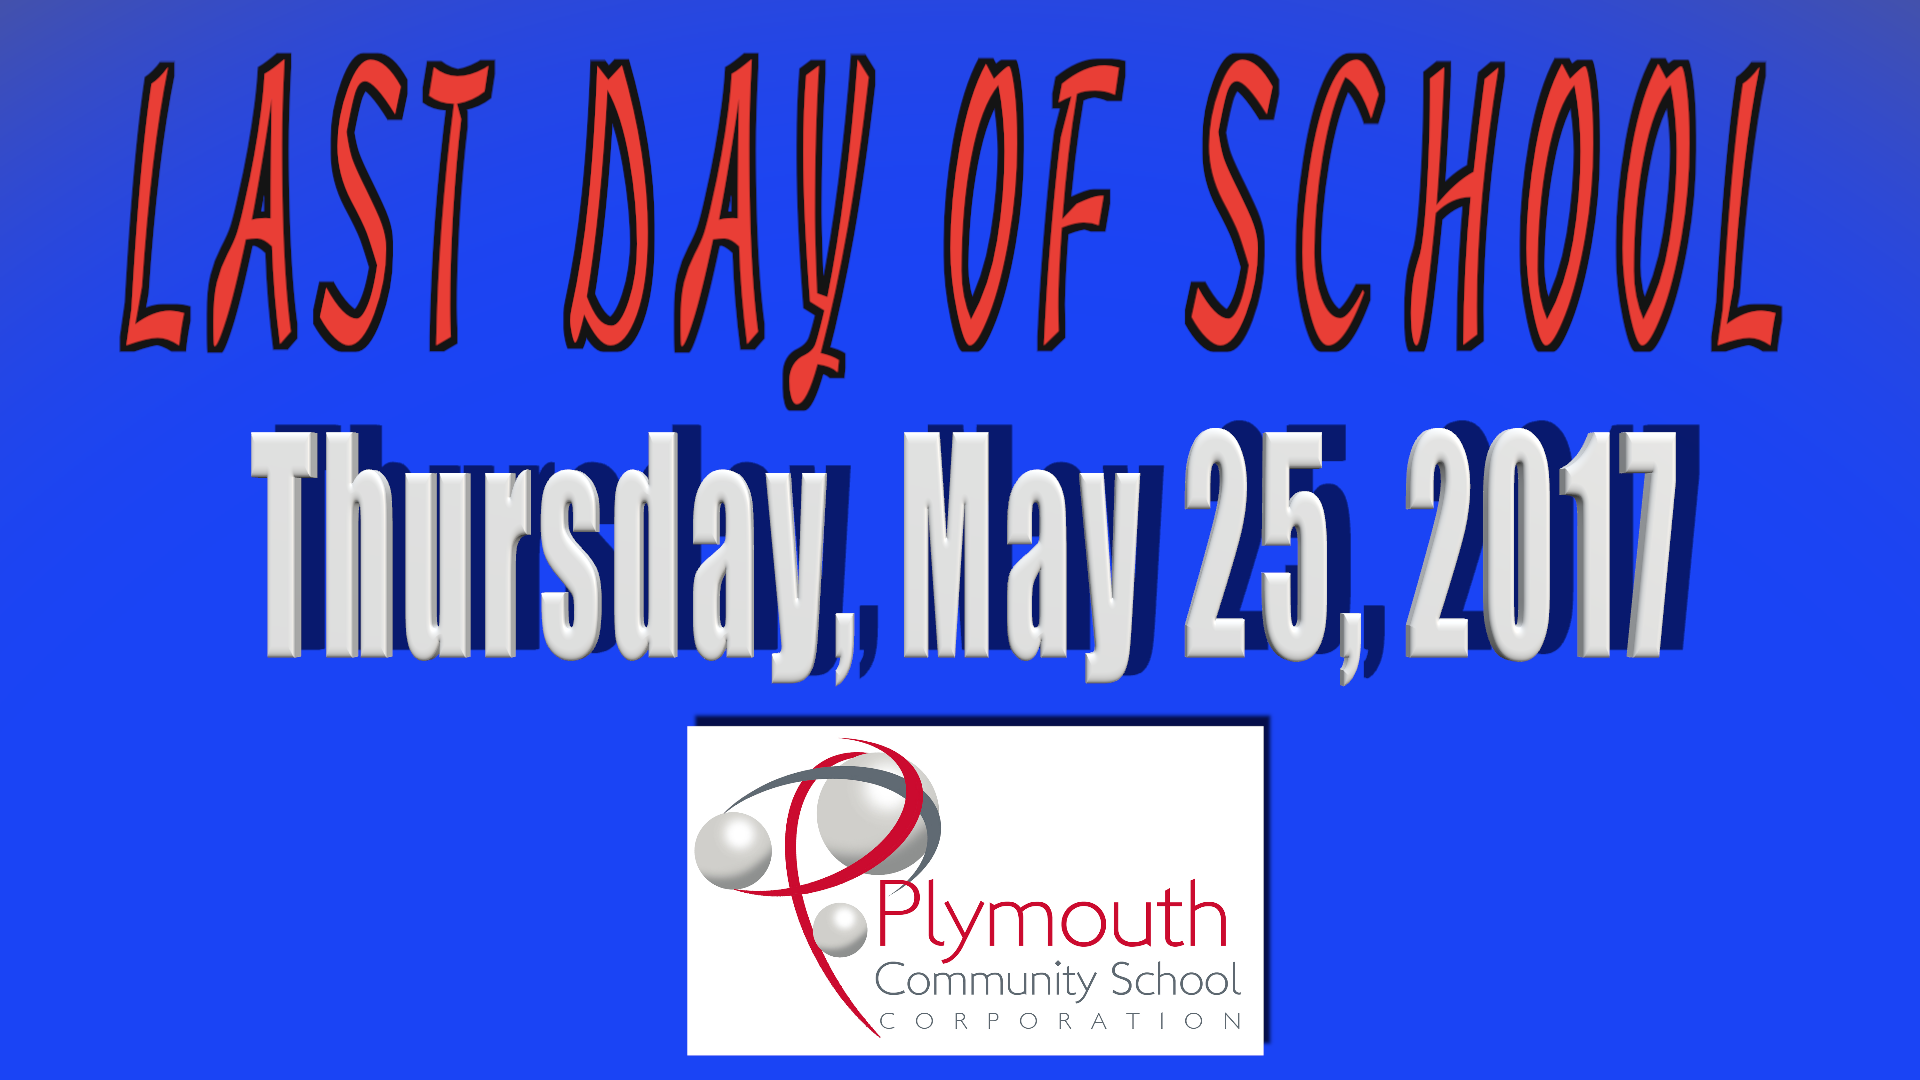 Last day of school is May 25, 2017